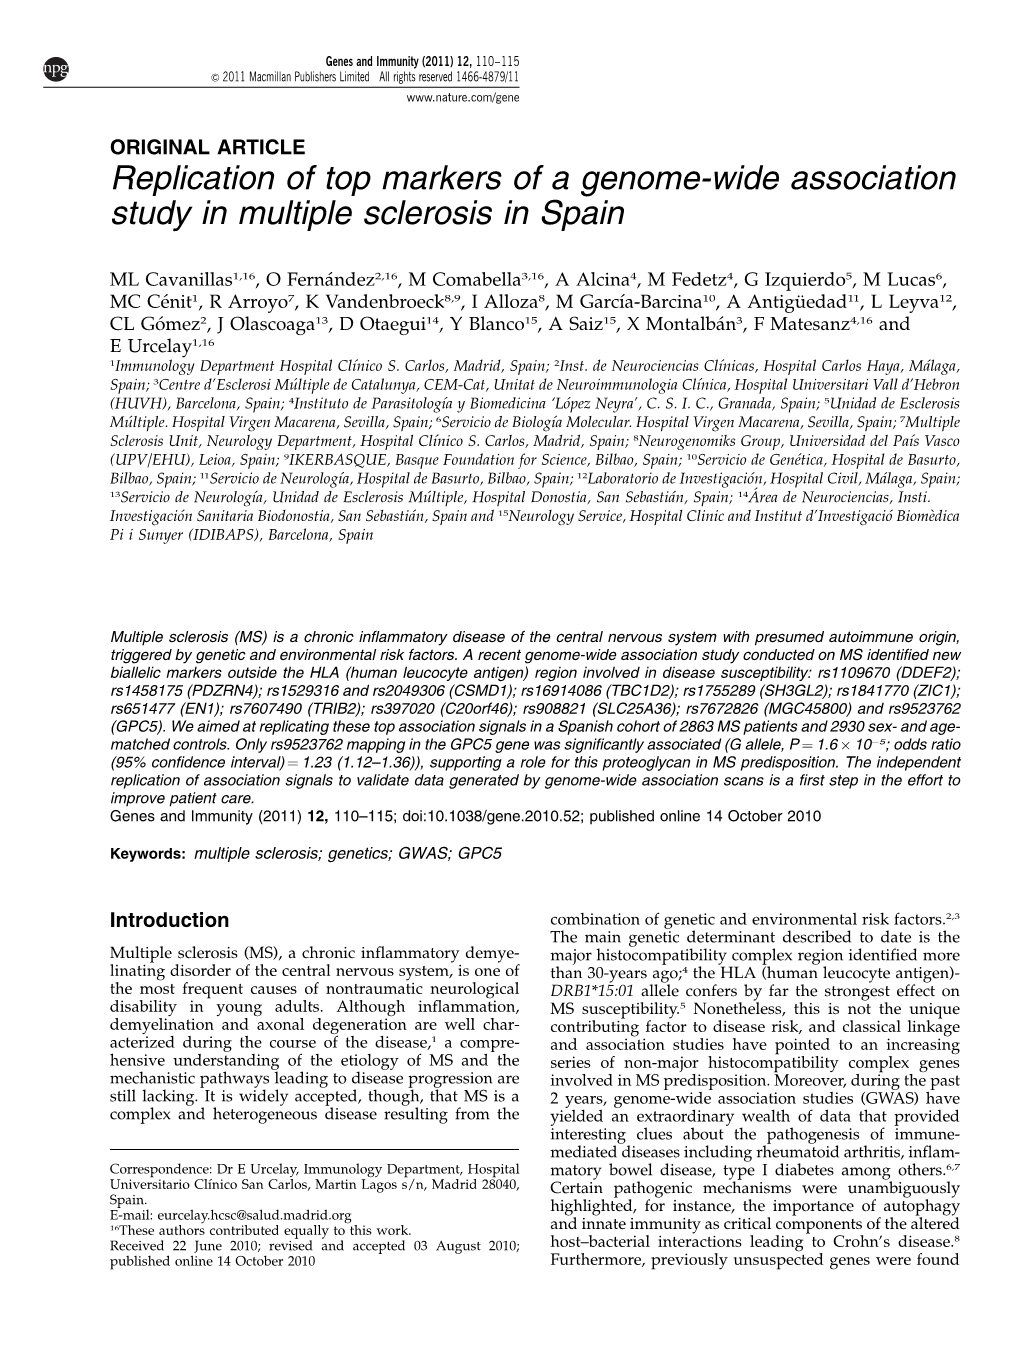 Replication of Top Markers of a Genome-Wide Association Study in Multiple Sclerosis in Spain